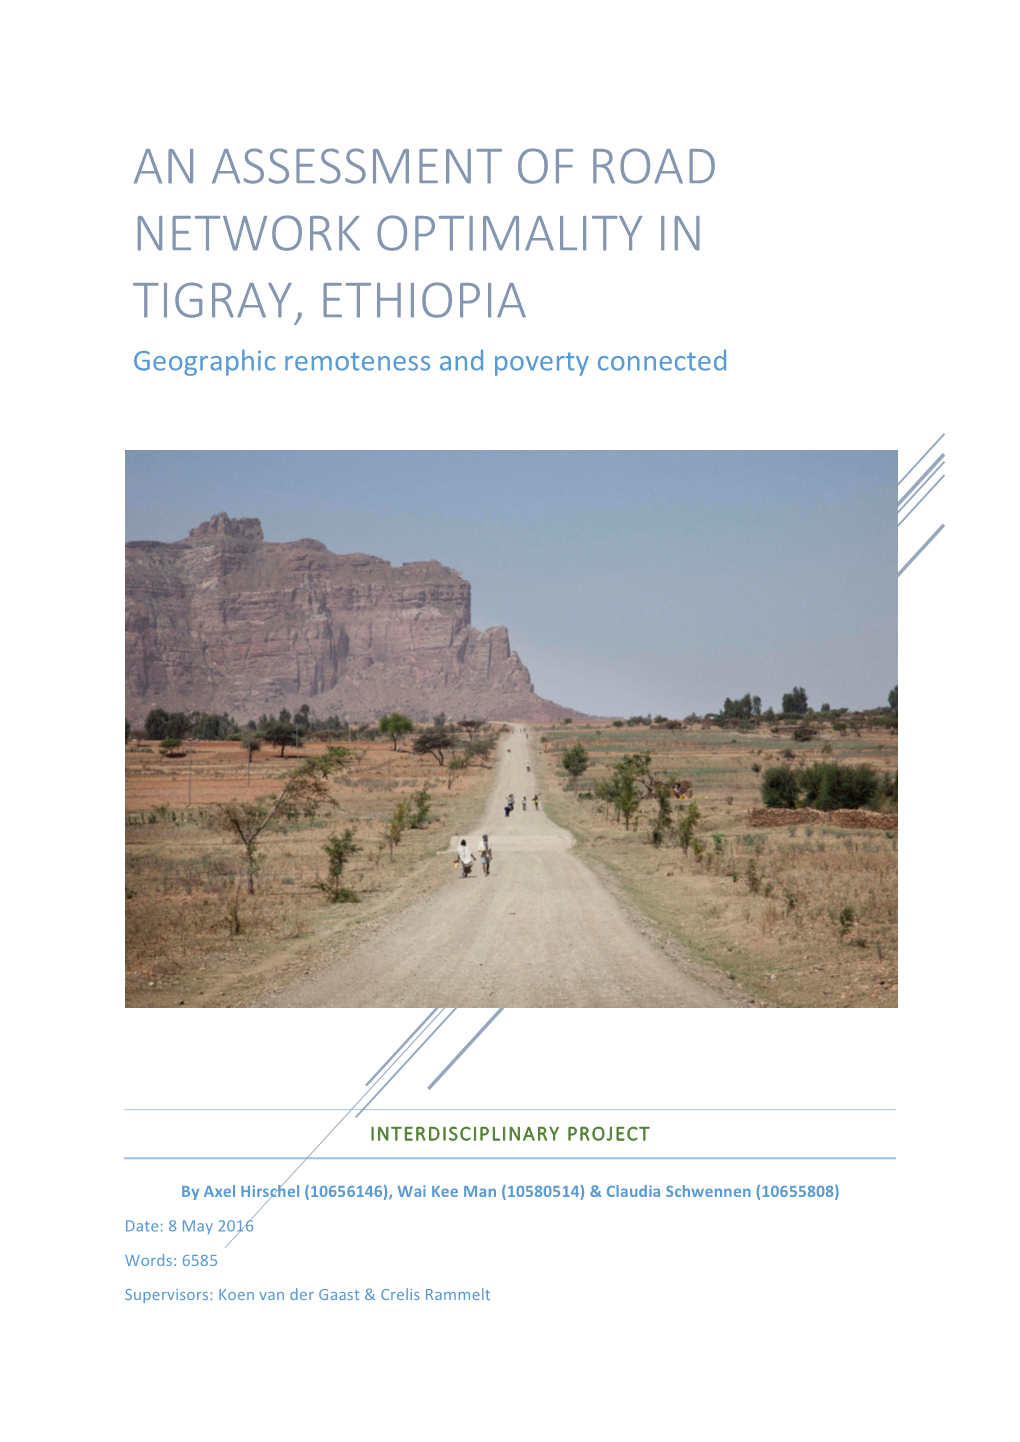 An Assessment of Road Network Optimality in Tigray, Ethiopia